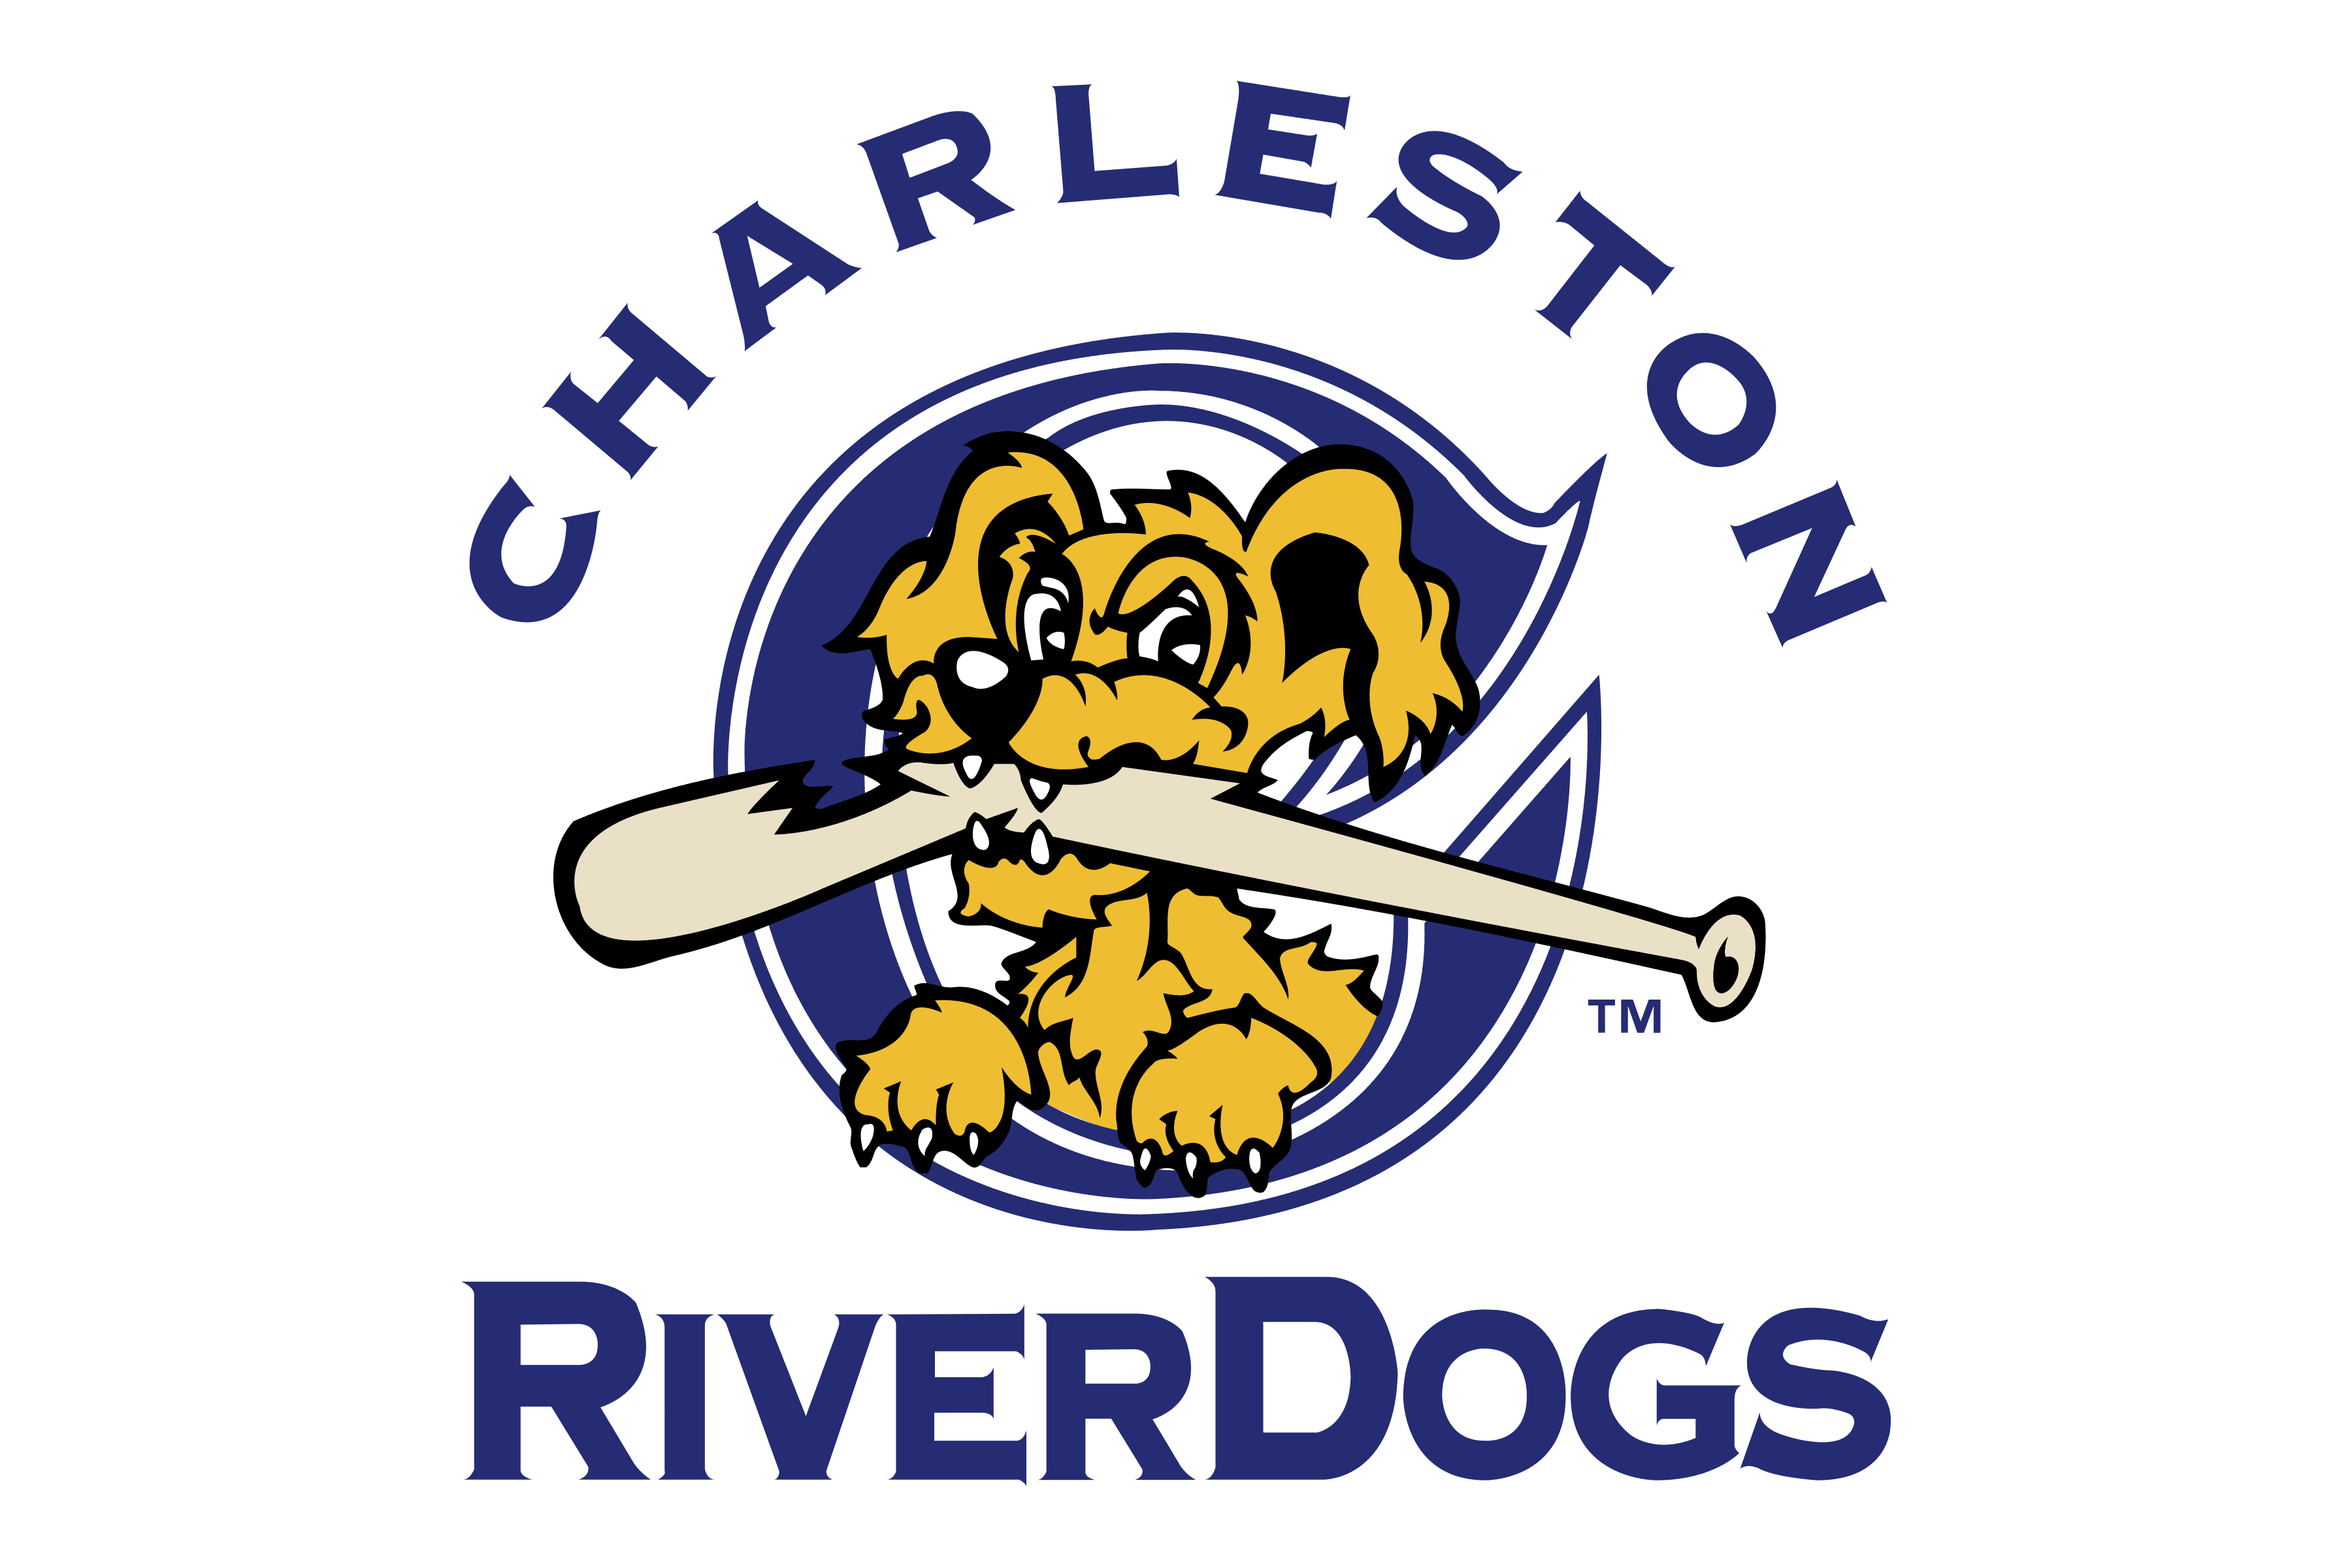 Charleston RiverDogs - Own a piece of RiverDogs history and help